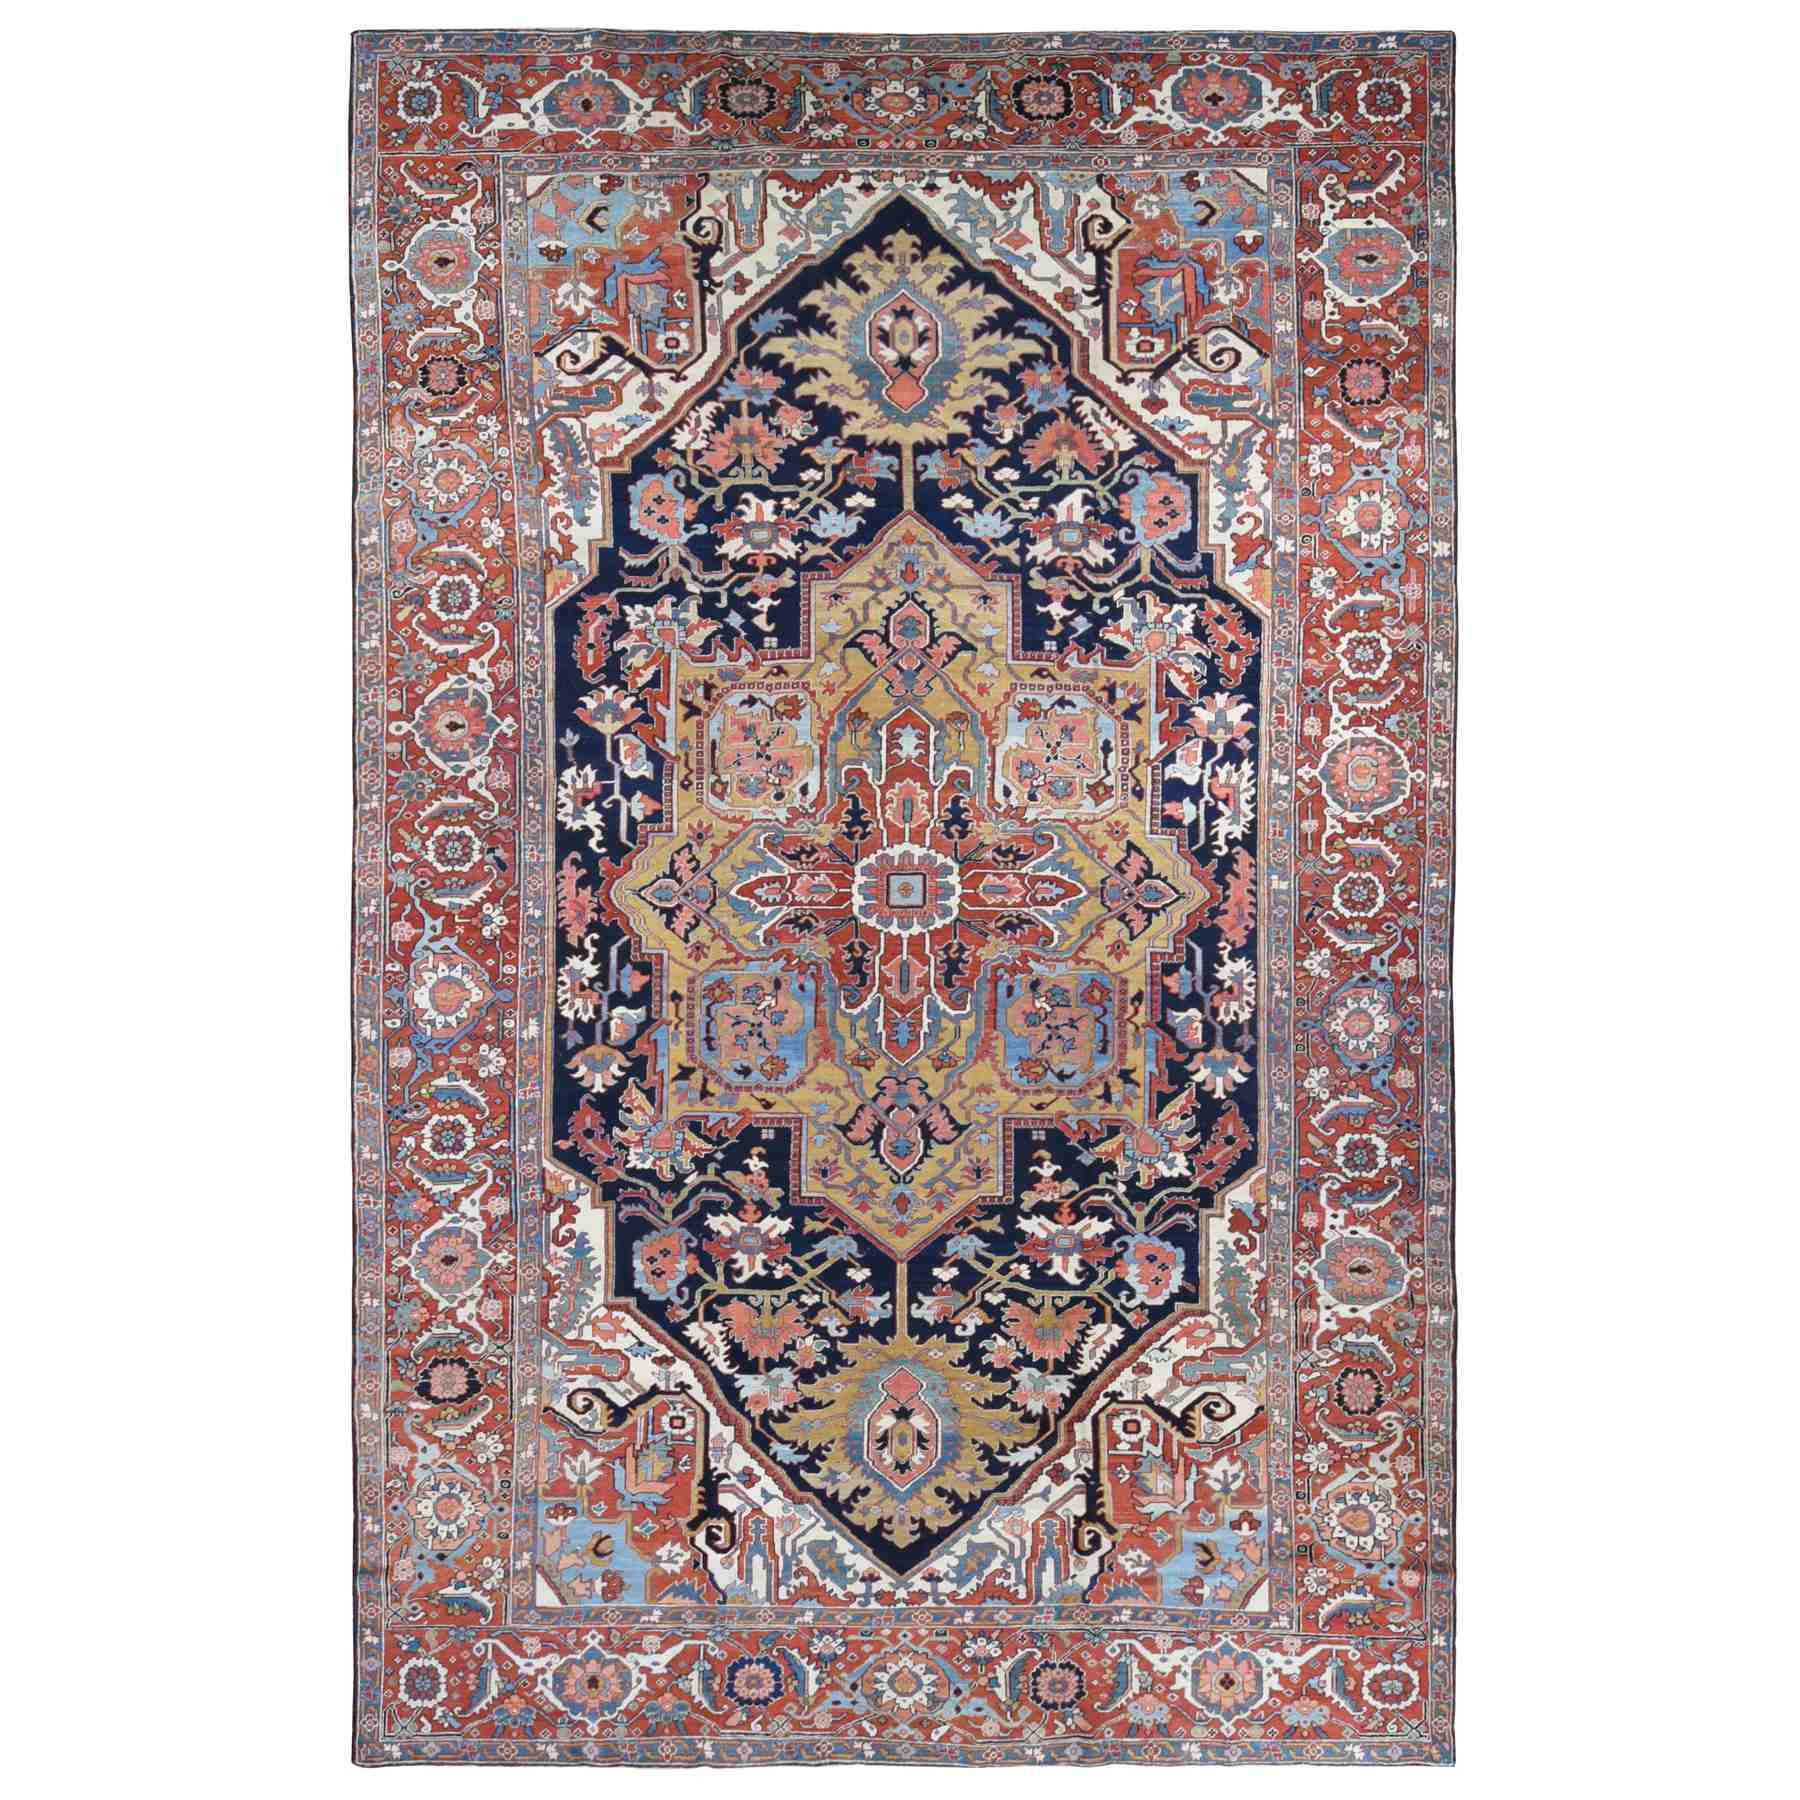 Antique-Hand-Knotted-Rug-403510